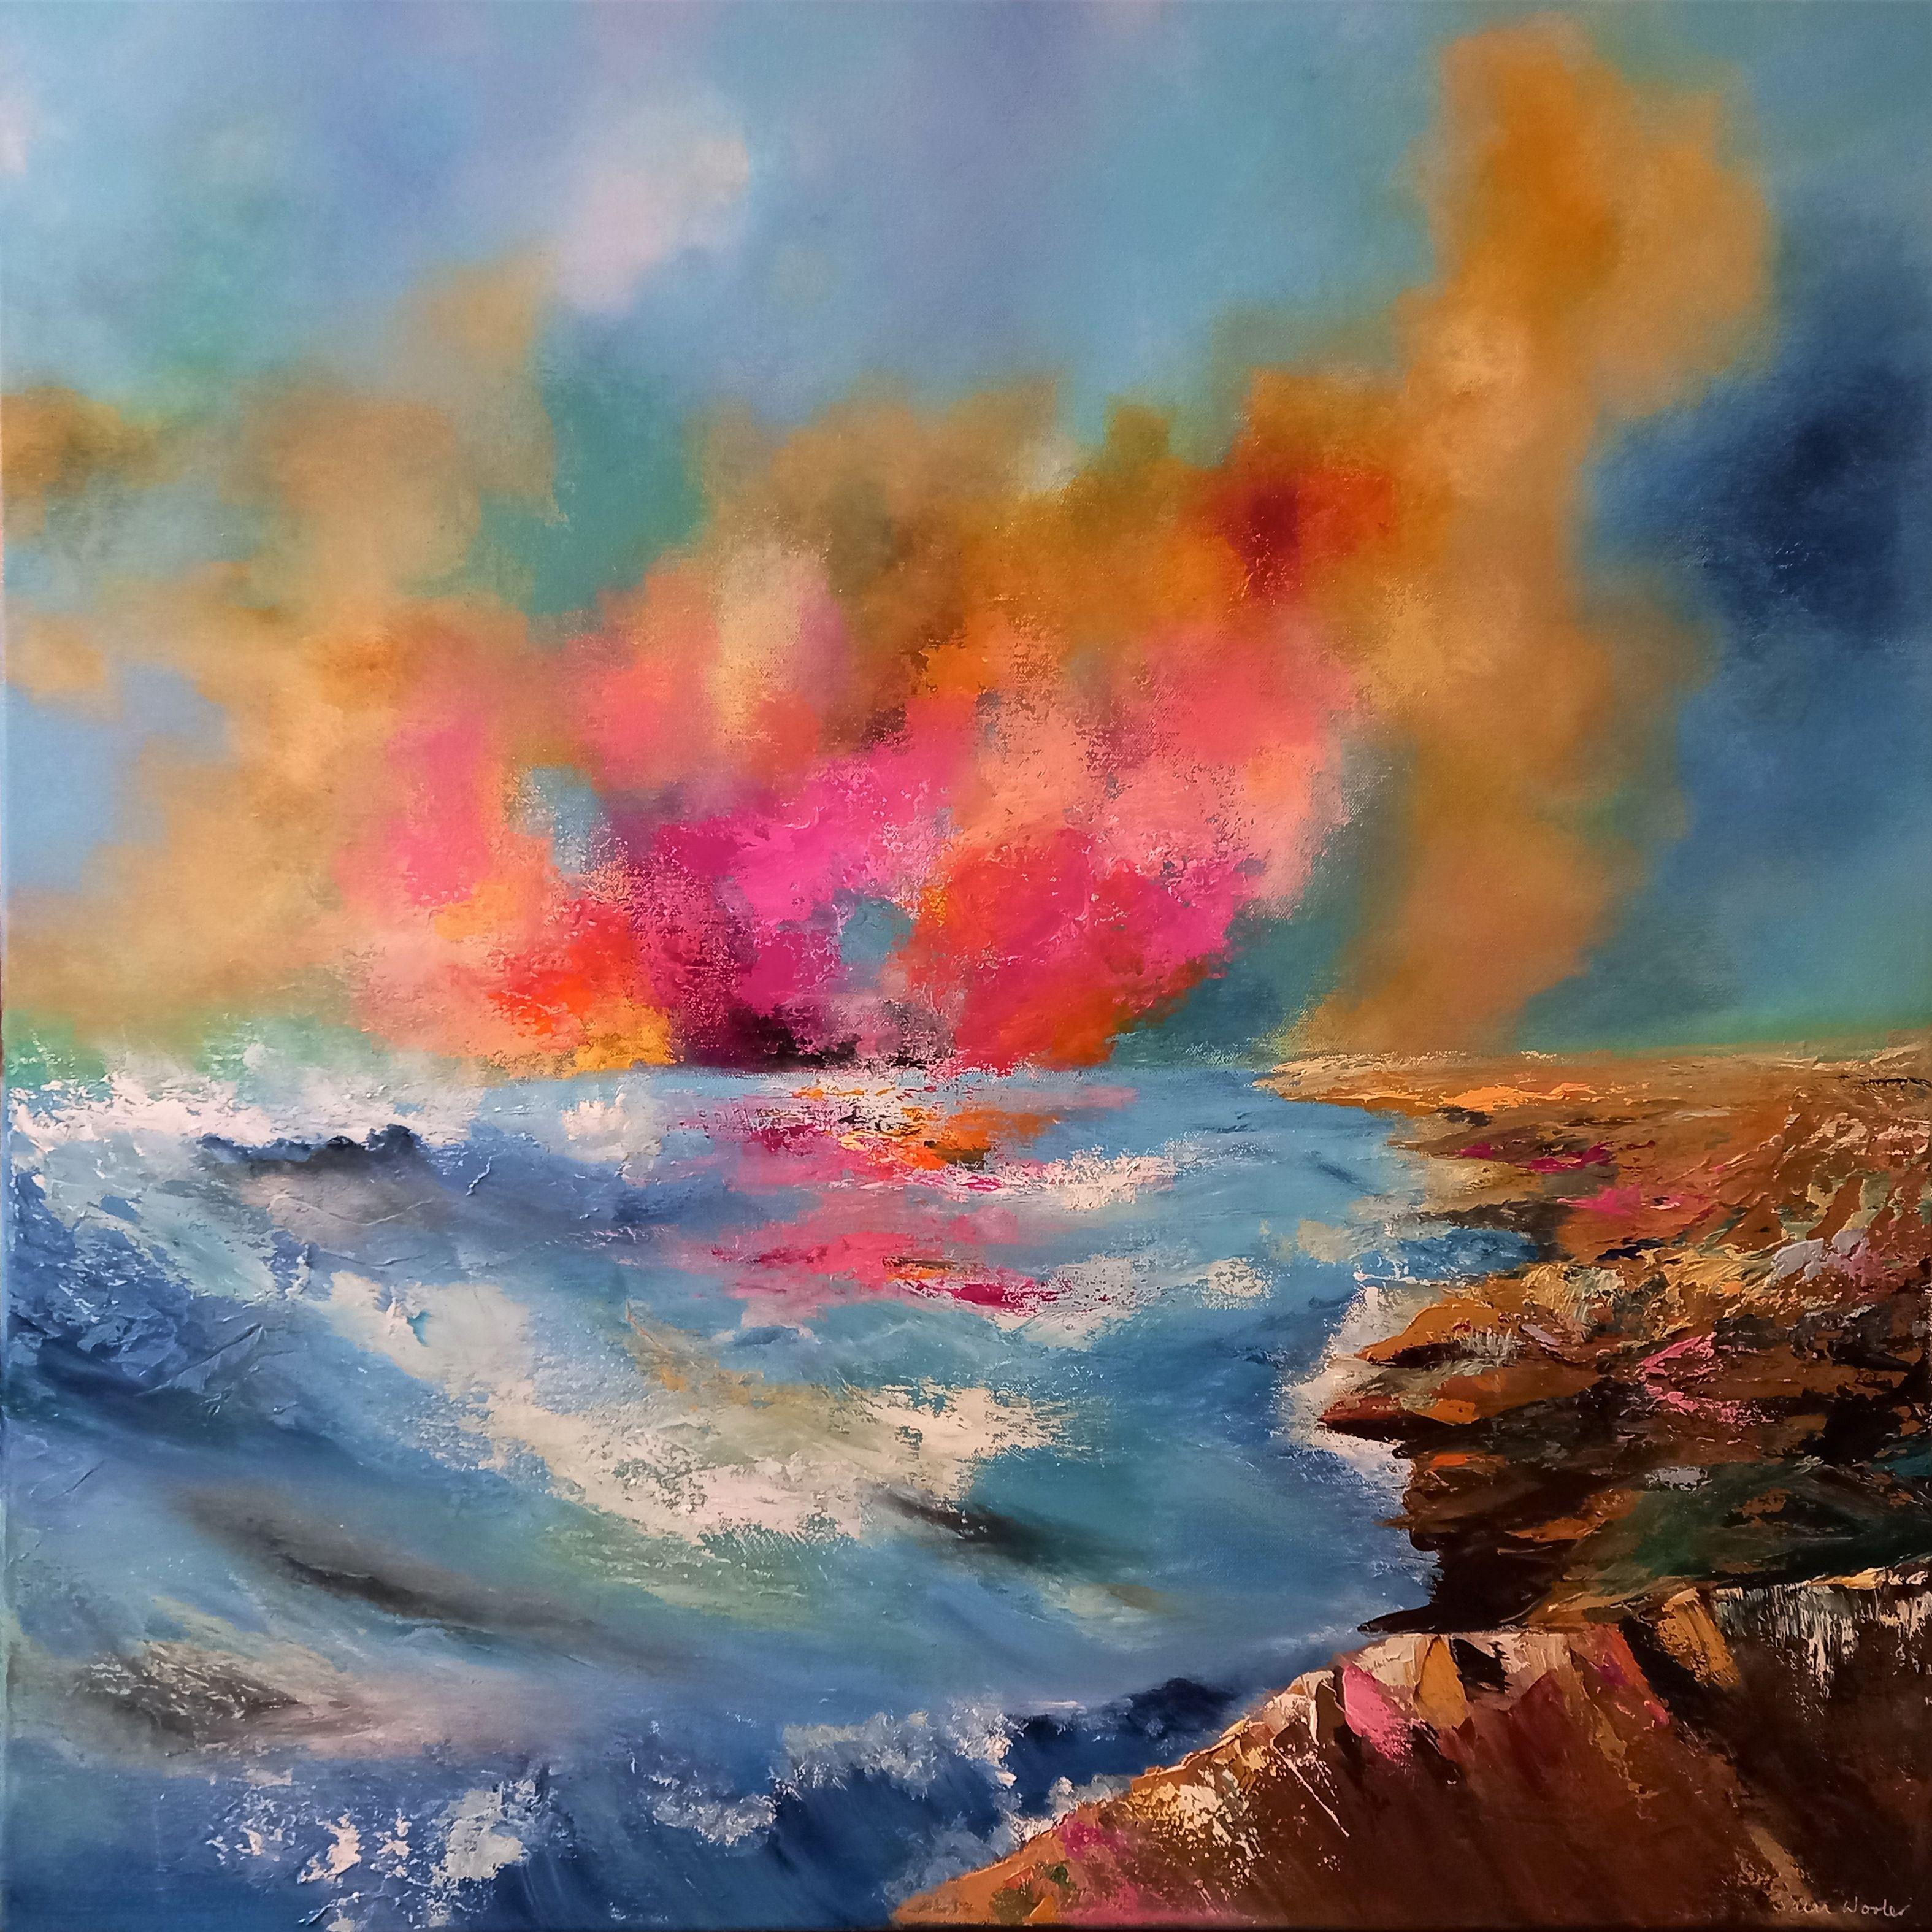  XXL Rugged Coastline Oil Painting 80 x 80 cm    Size 80 x 80 cms  Impasto / Textured  Professional Gallery Wrapped Canvas  Edges Painted Black  Ready to Hang  Varnished for protection  Rooms for reference    Signed, dated and titled. Original